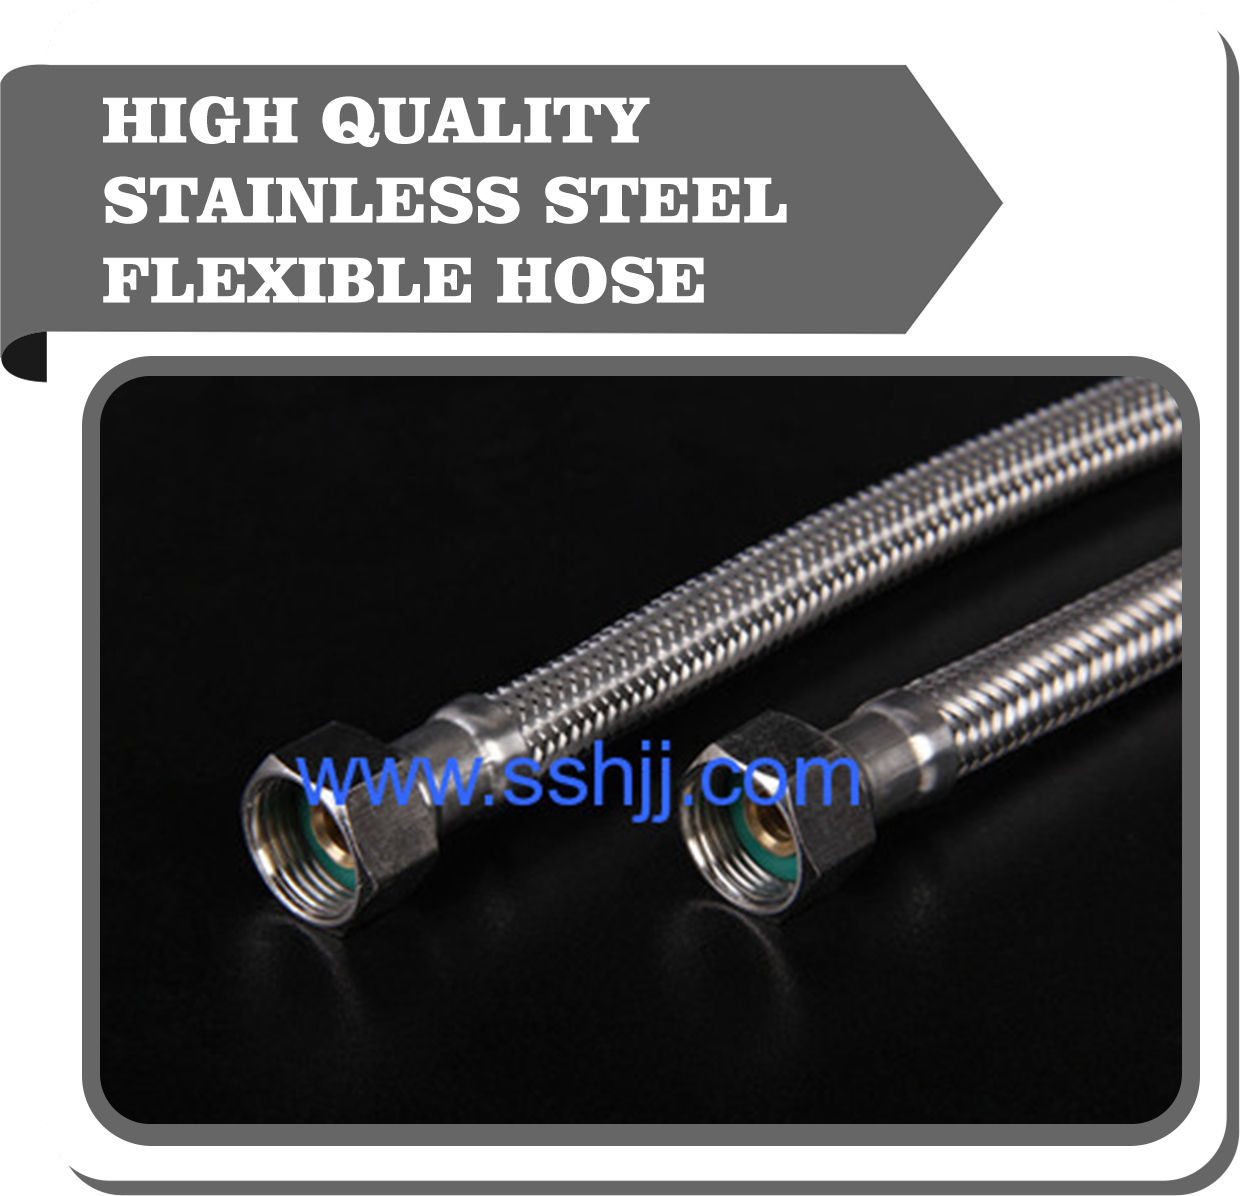 High quality stainless steel flexible hose